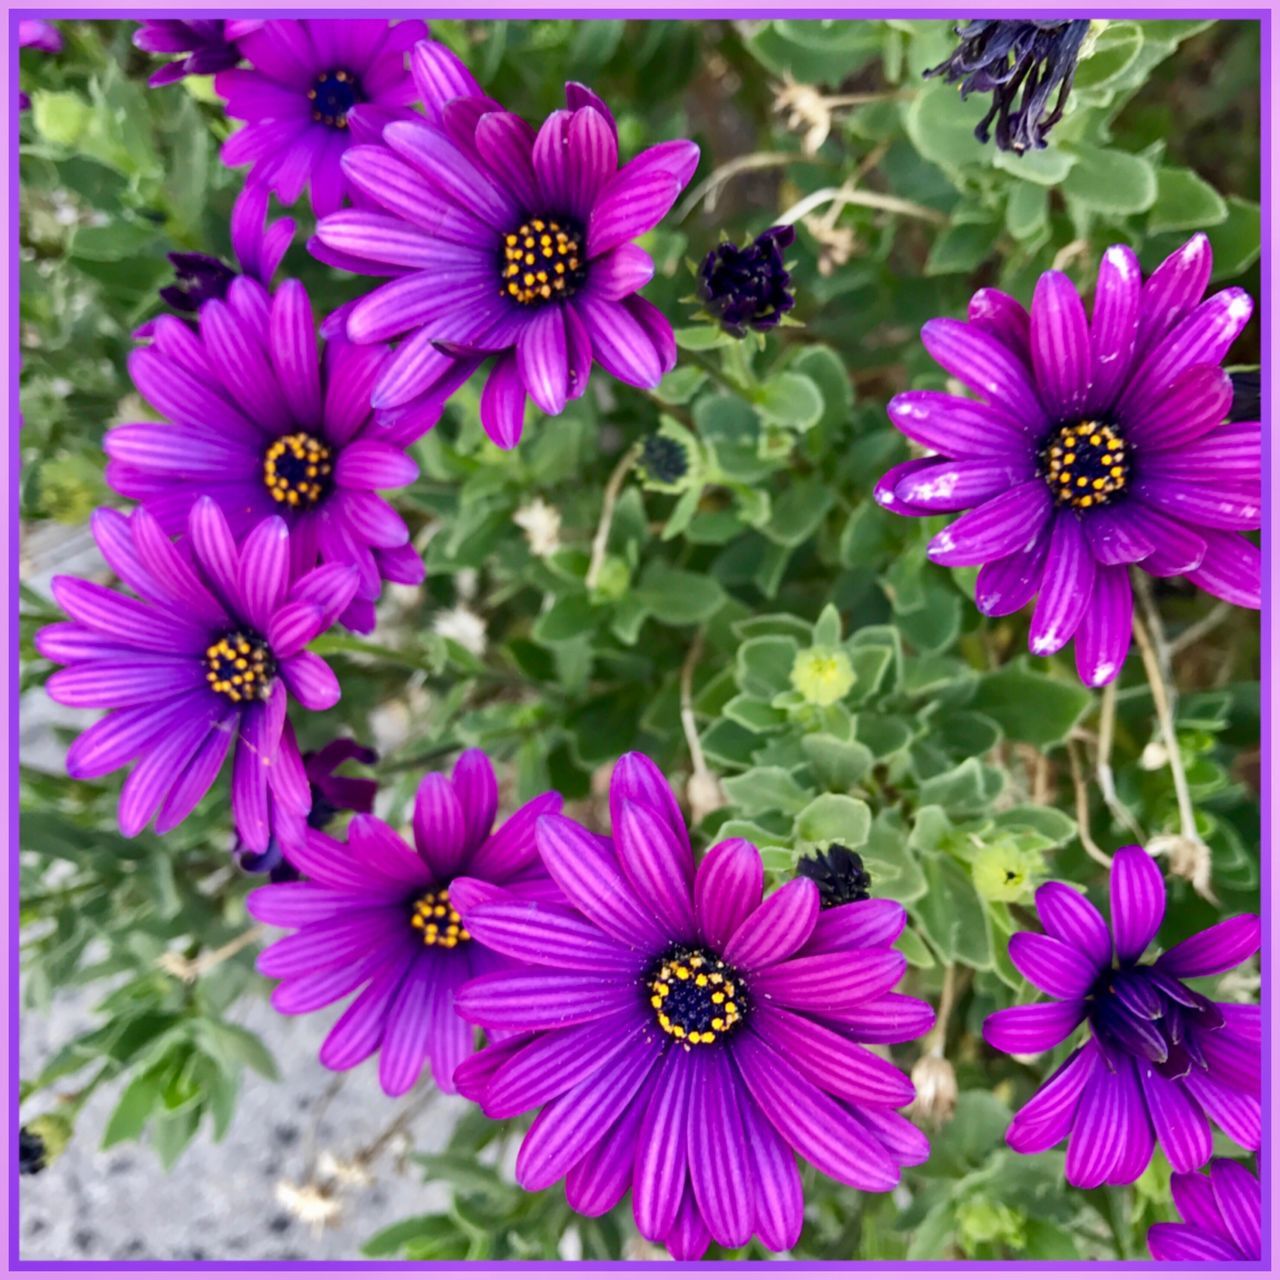 flower, fragility, nature, freshness, beauty in nature, flower head, petal, blooming, growth, plant, purple, focus on foreground, pollen, no people, day, outdoors, close-up, osteospermum, zinnia